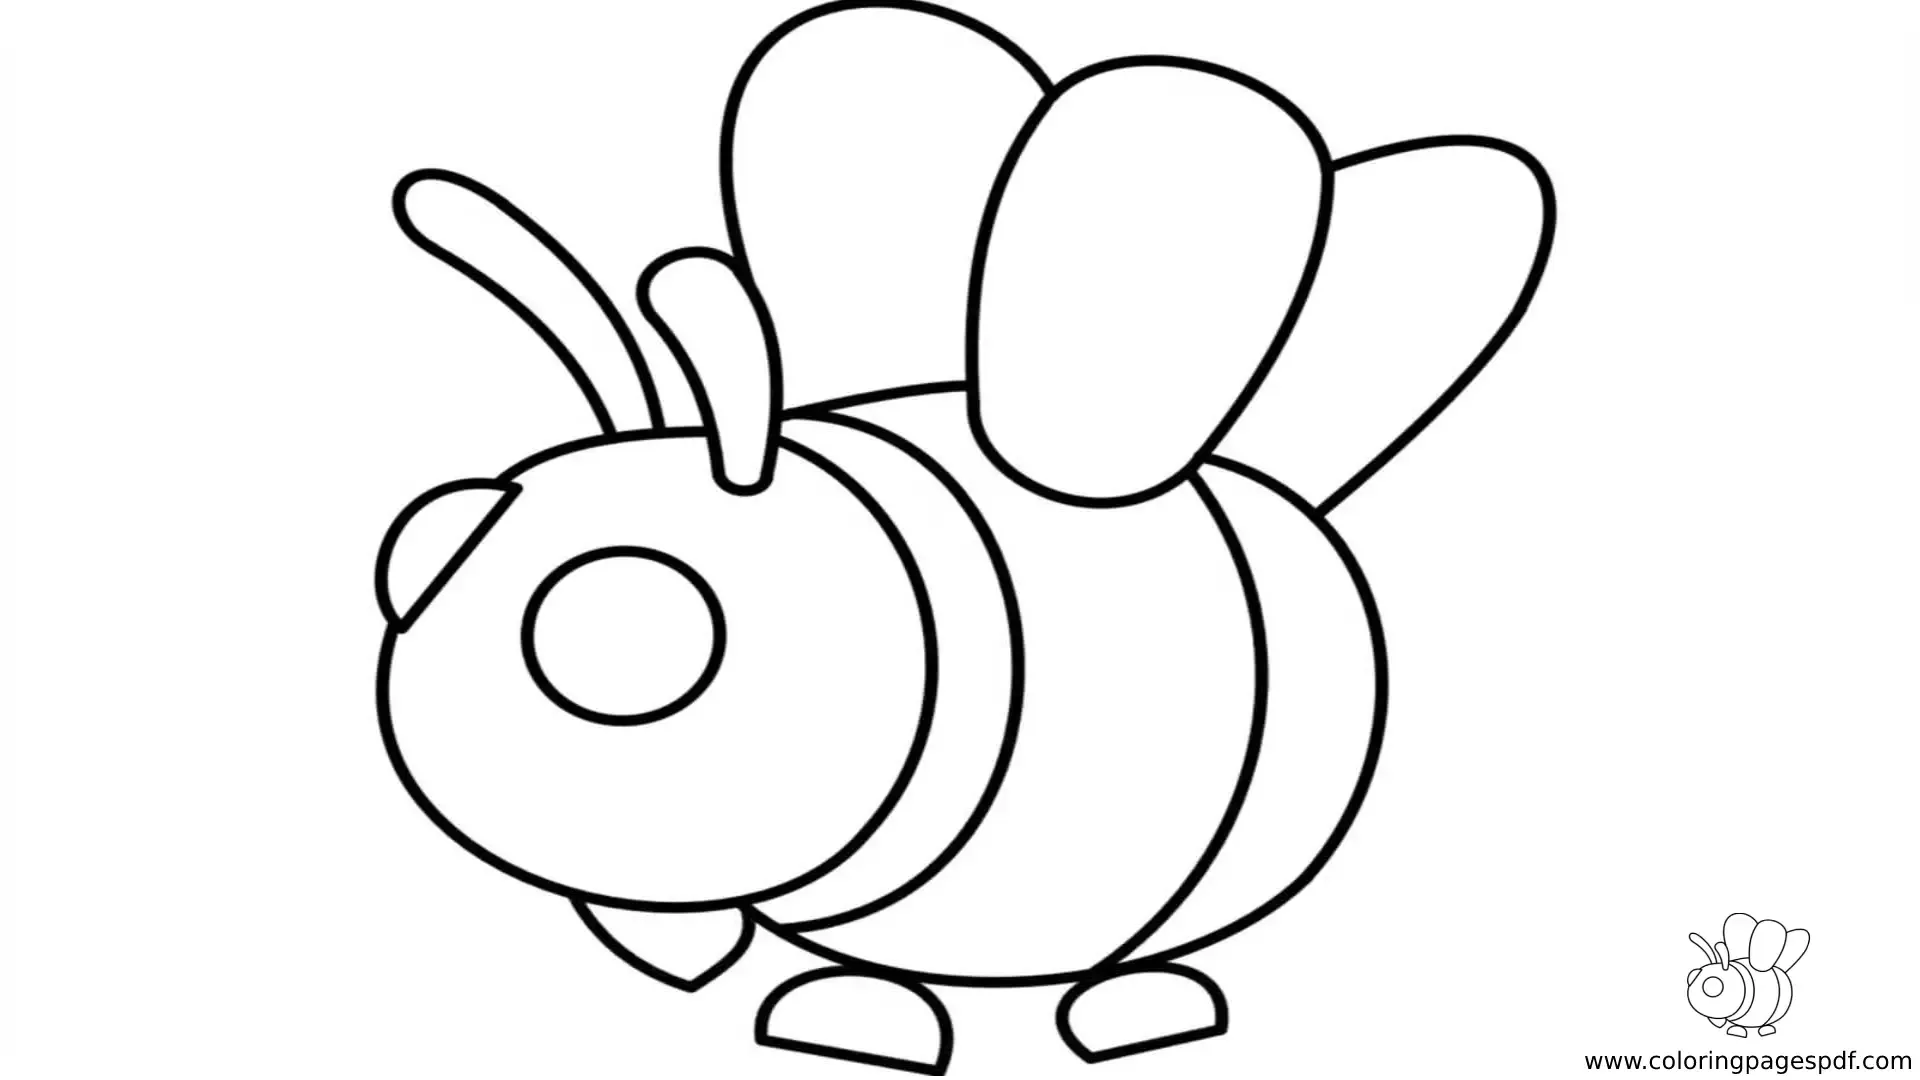 Adopt Me Bee Coloring Pages